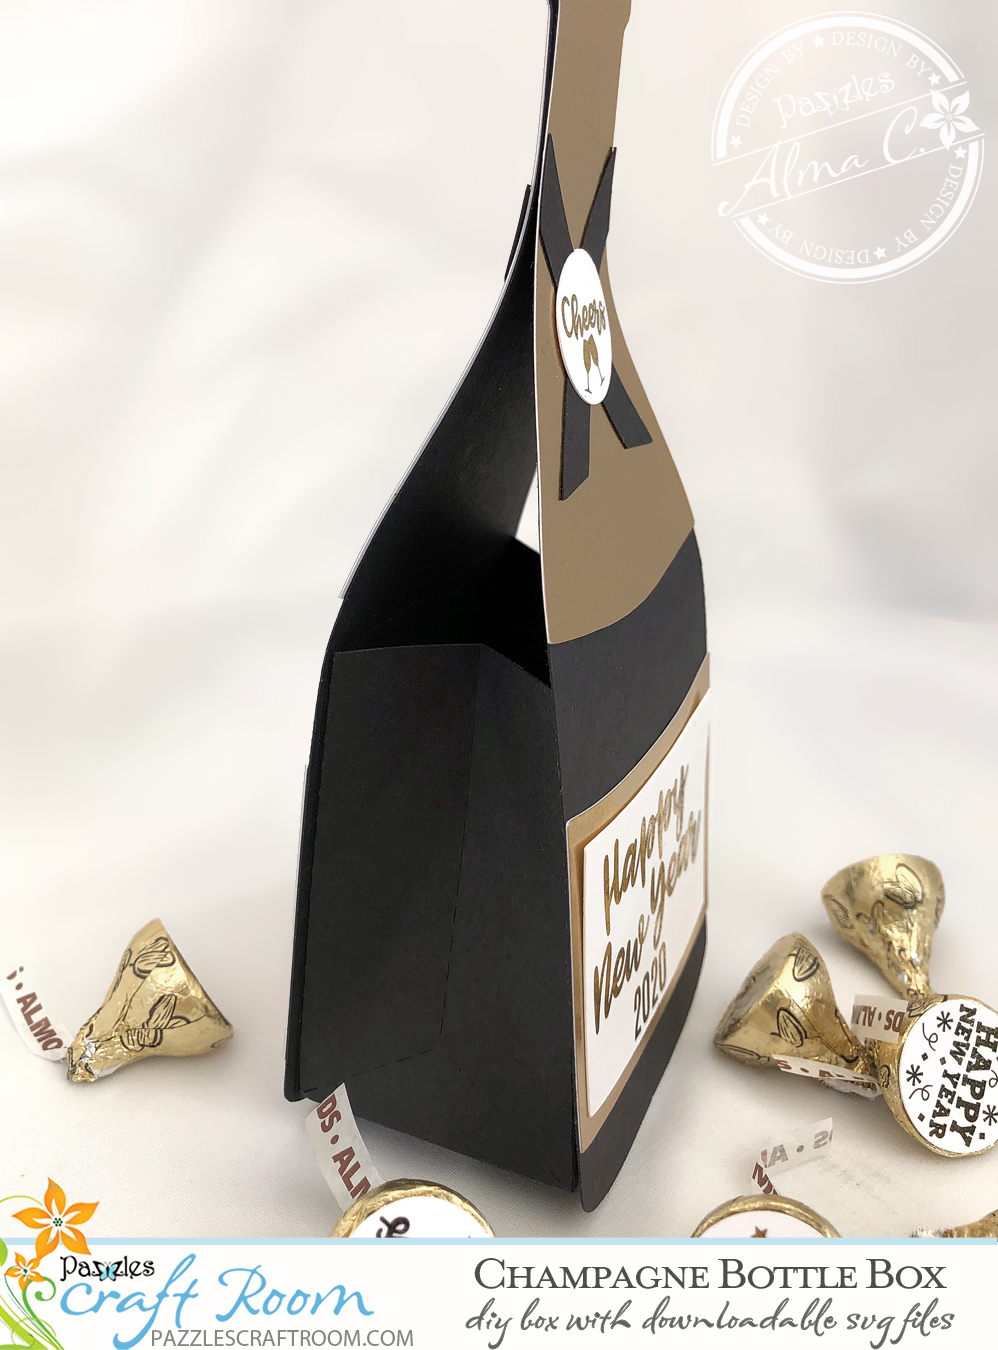 Pazzles DIY Champagne Bottle Box with instant SVG download. Compatible with all major electronic cutters including Pazzles Inspiration, Cricut, and Silhouette Cameo. Design by Alma Cervantes.